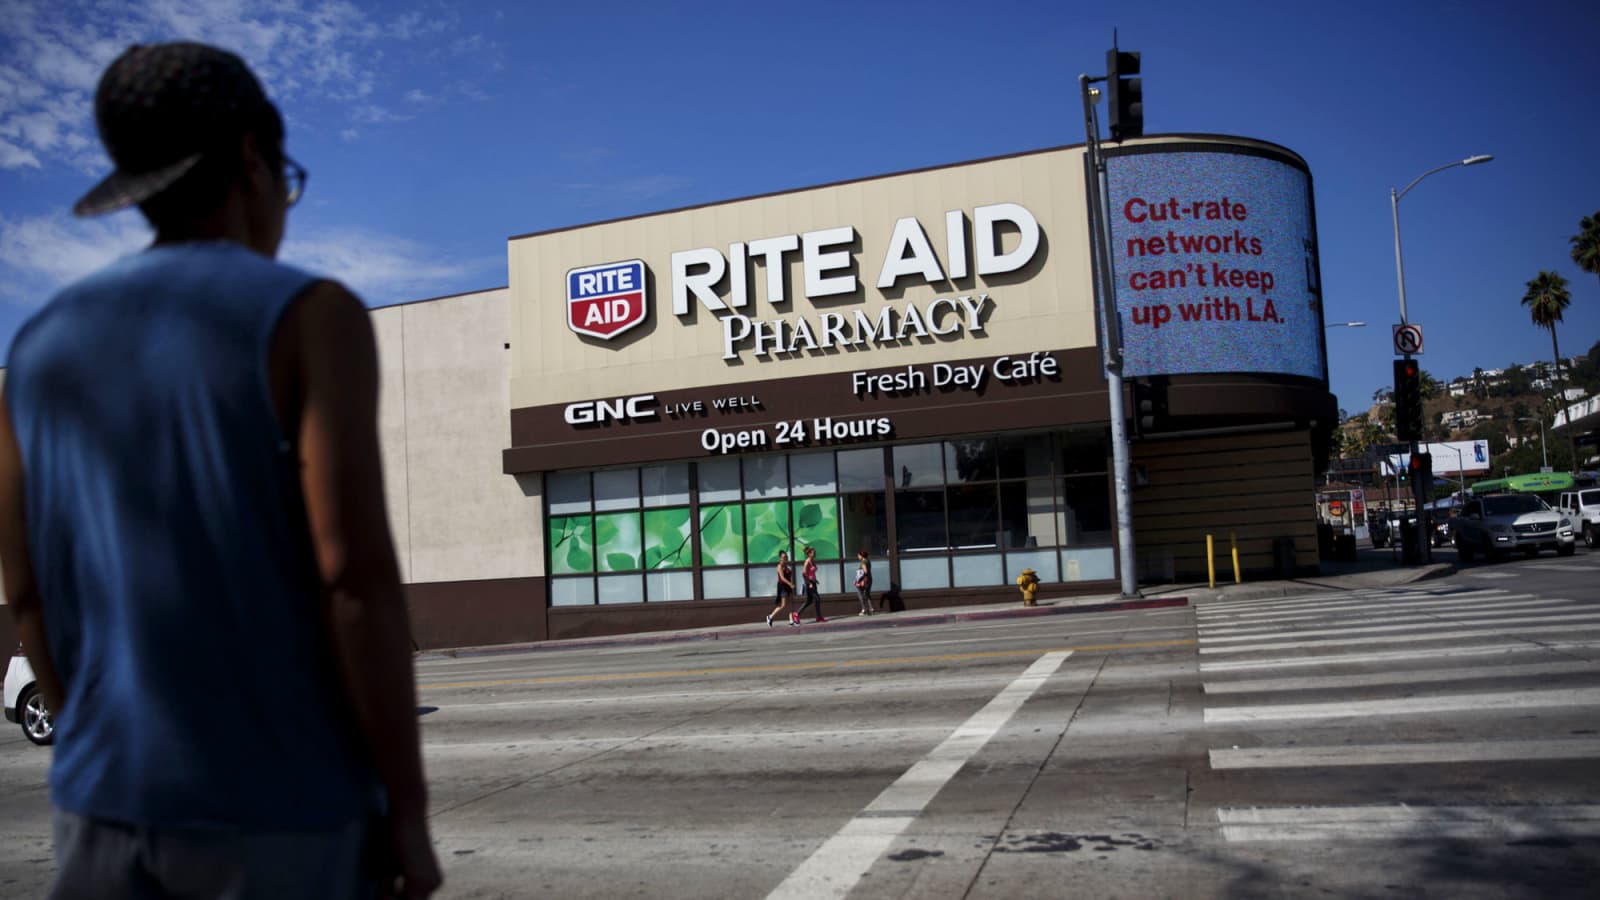 rite aid career mapping Amazon Launches New In Store Pickup Option With Rite Aid As Its